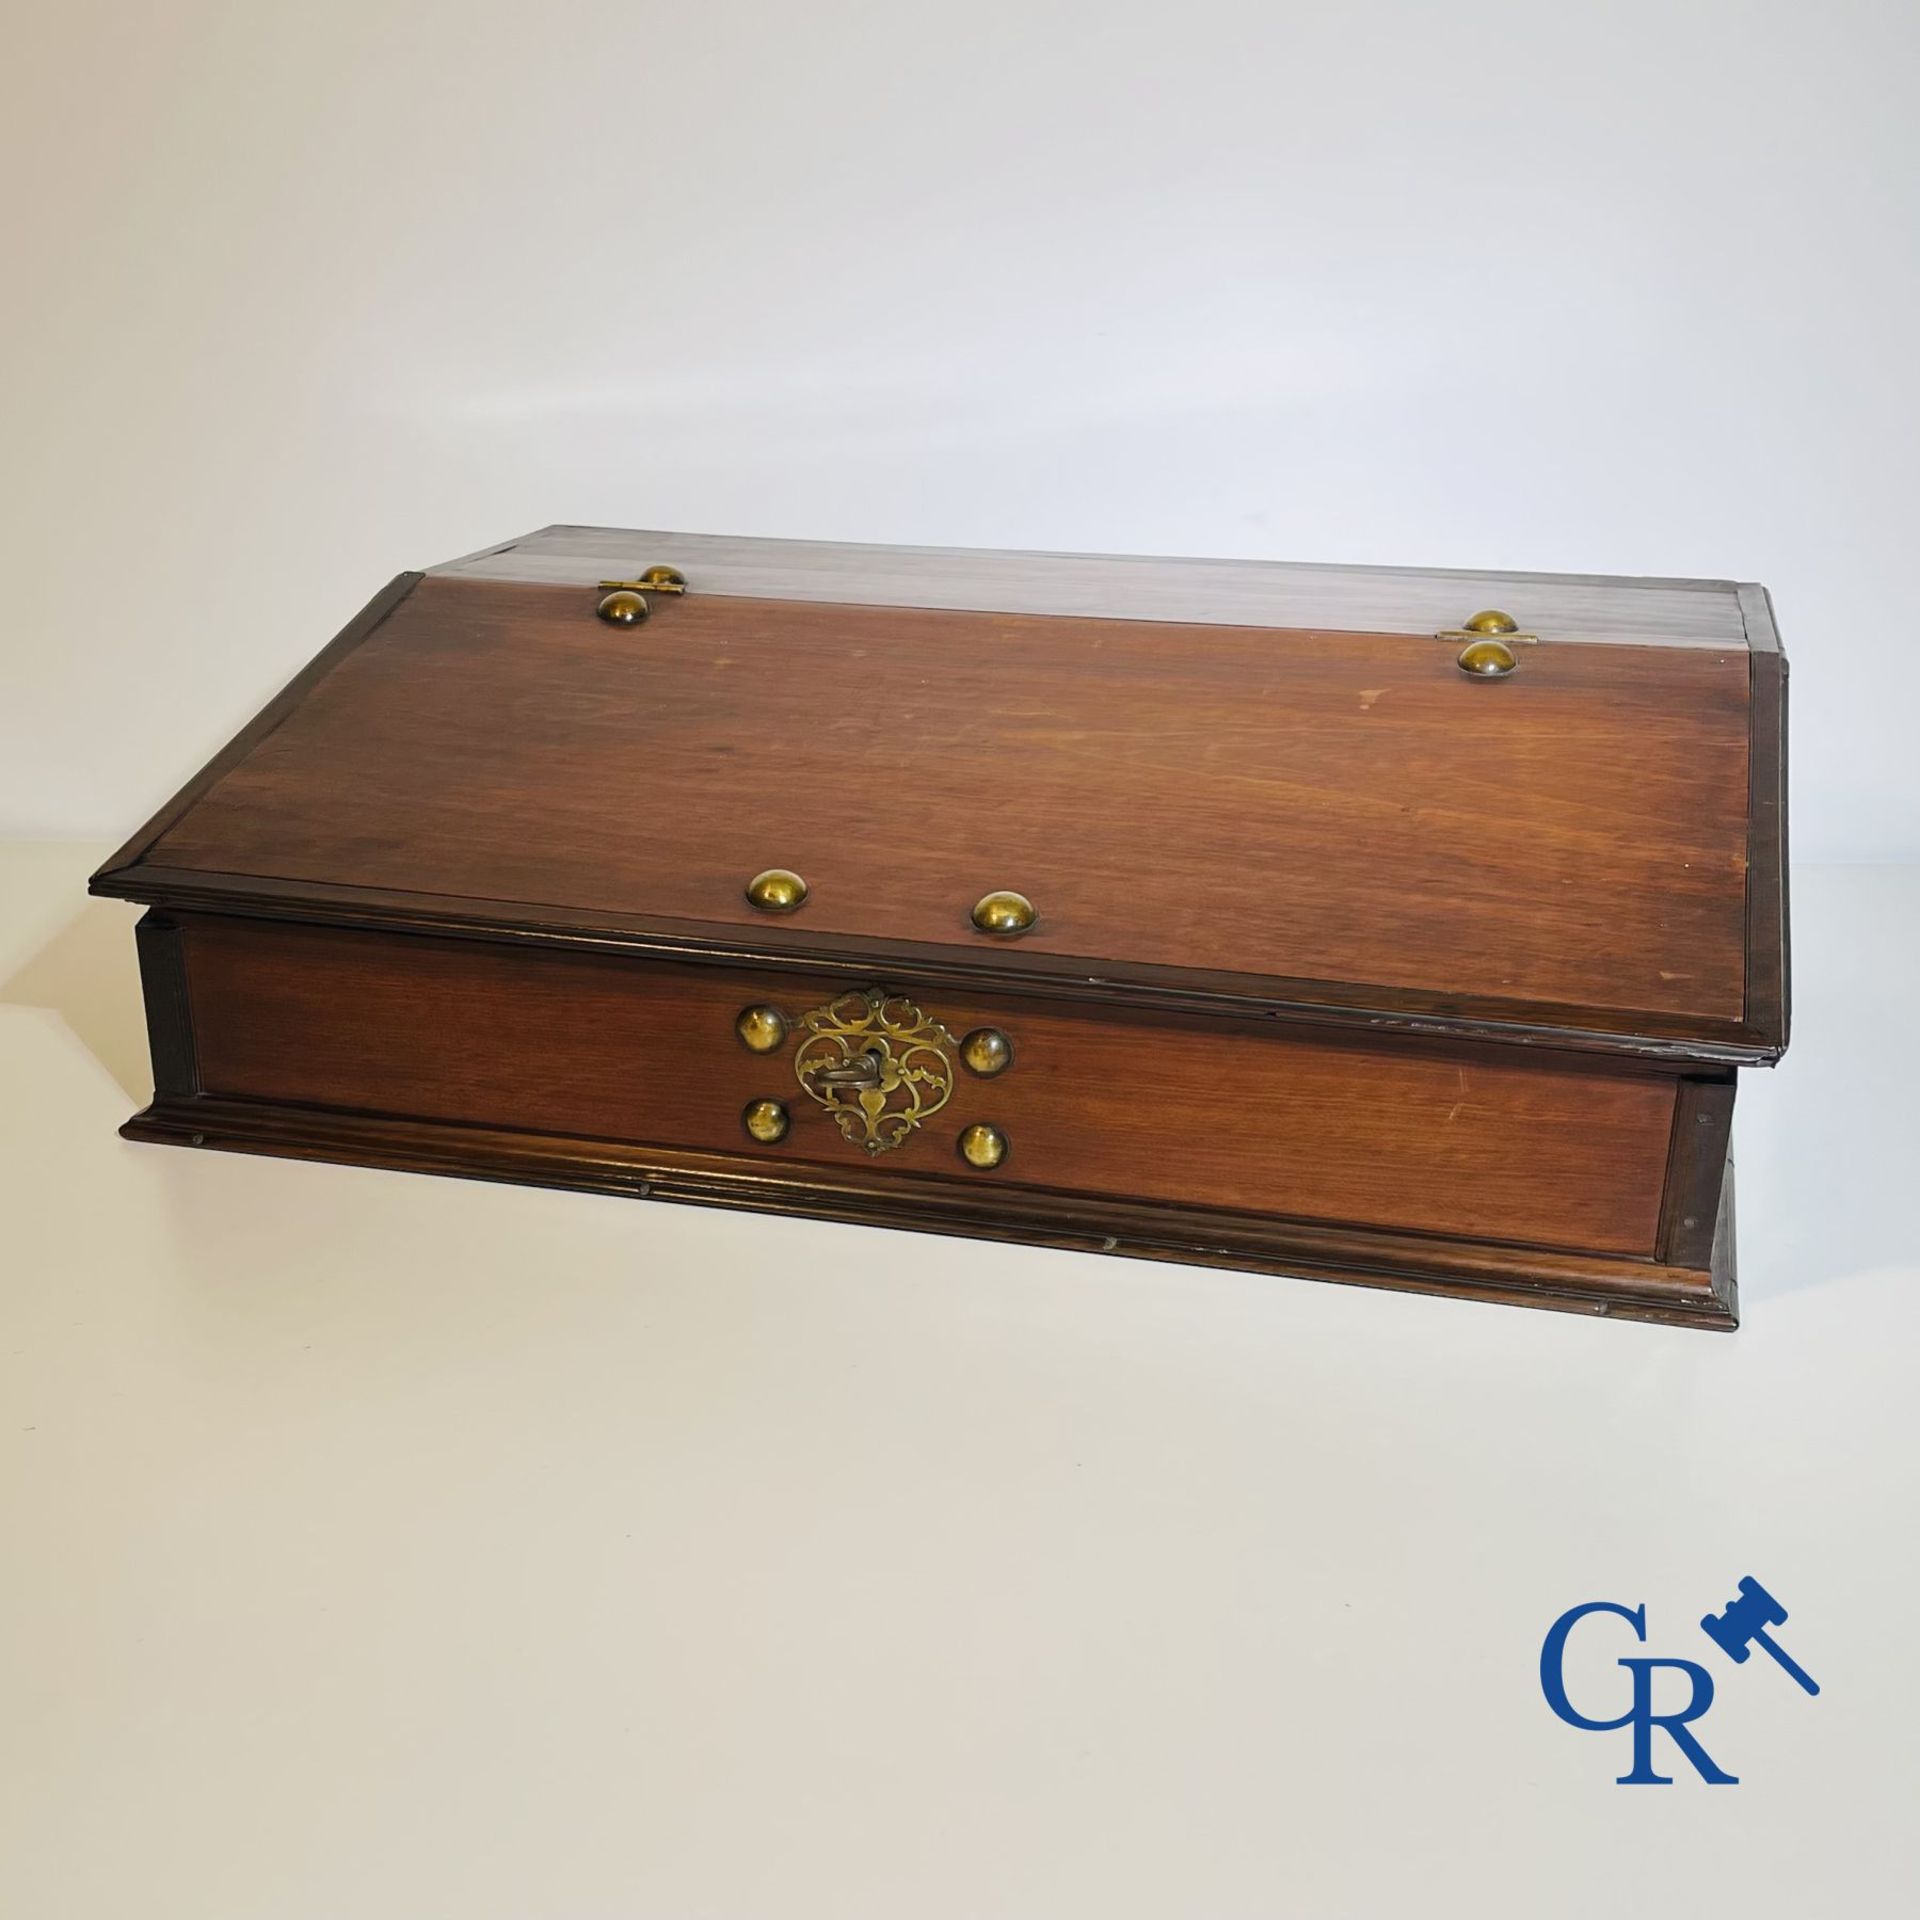 A large mahogany writing case with bronze fittings. Early 19th century. - Bild 3 aus 6